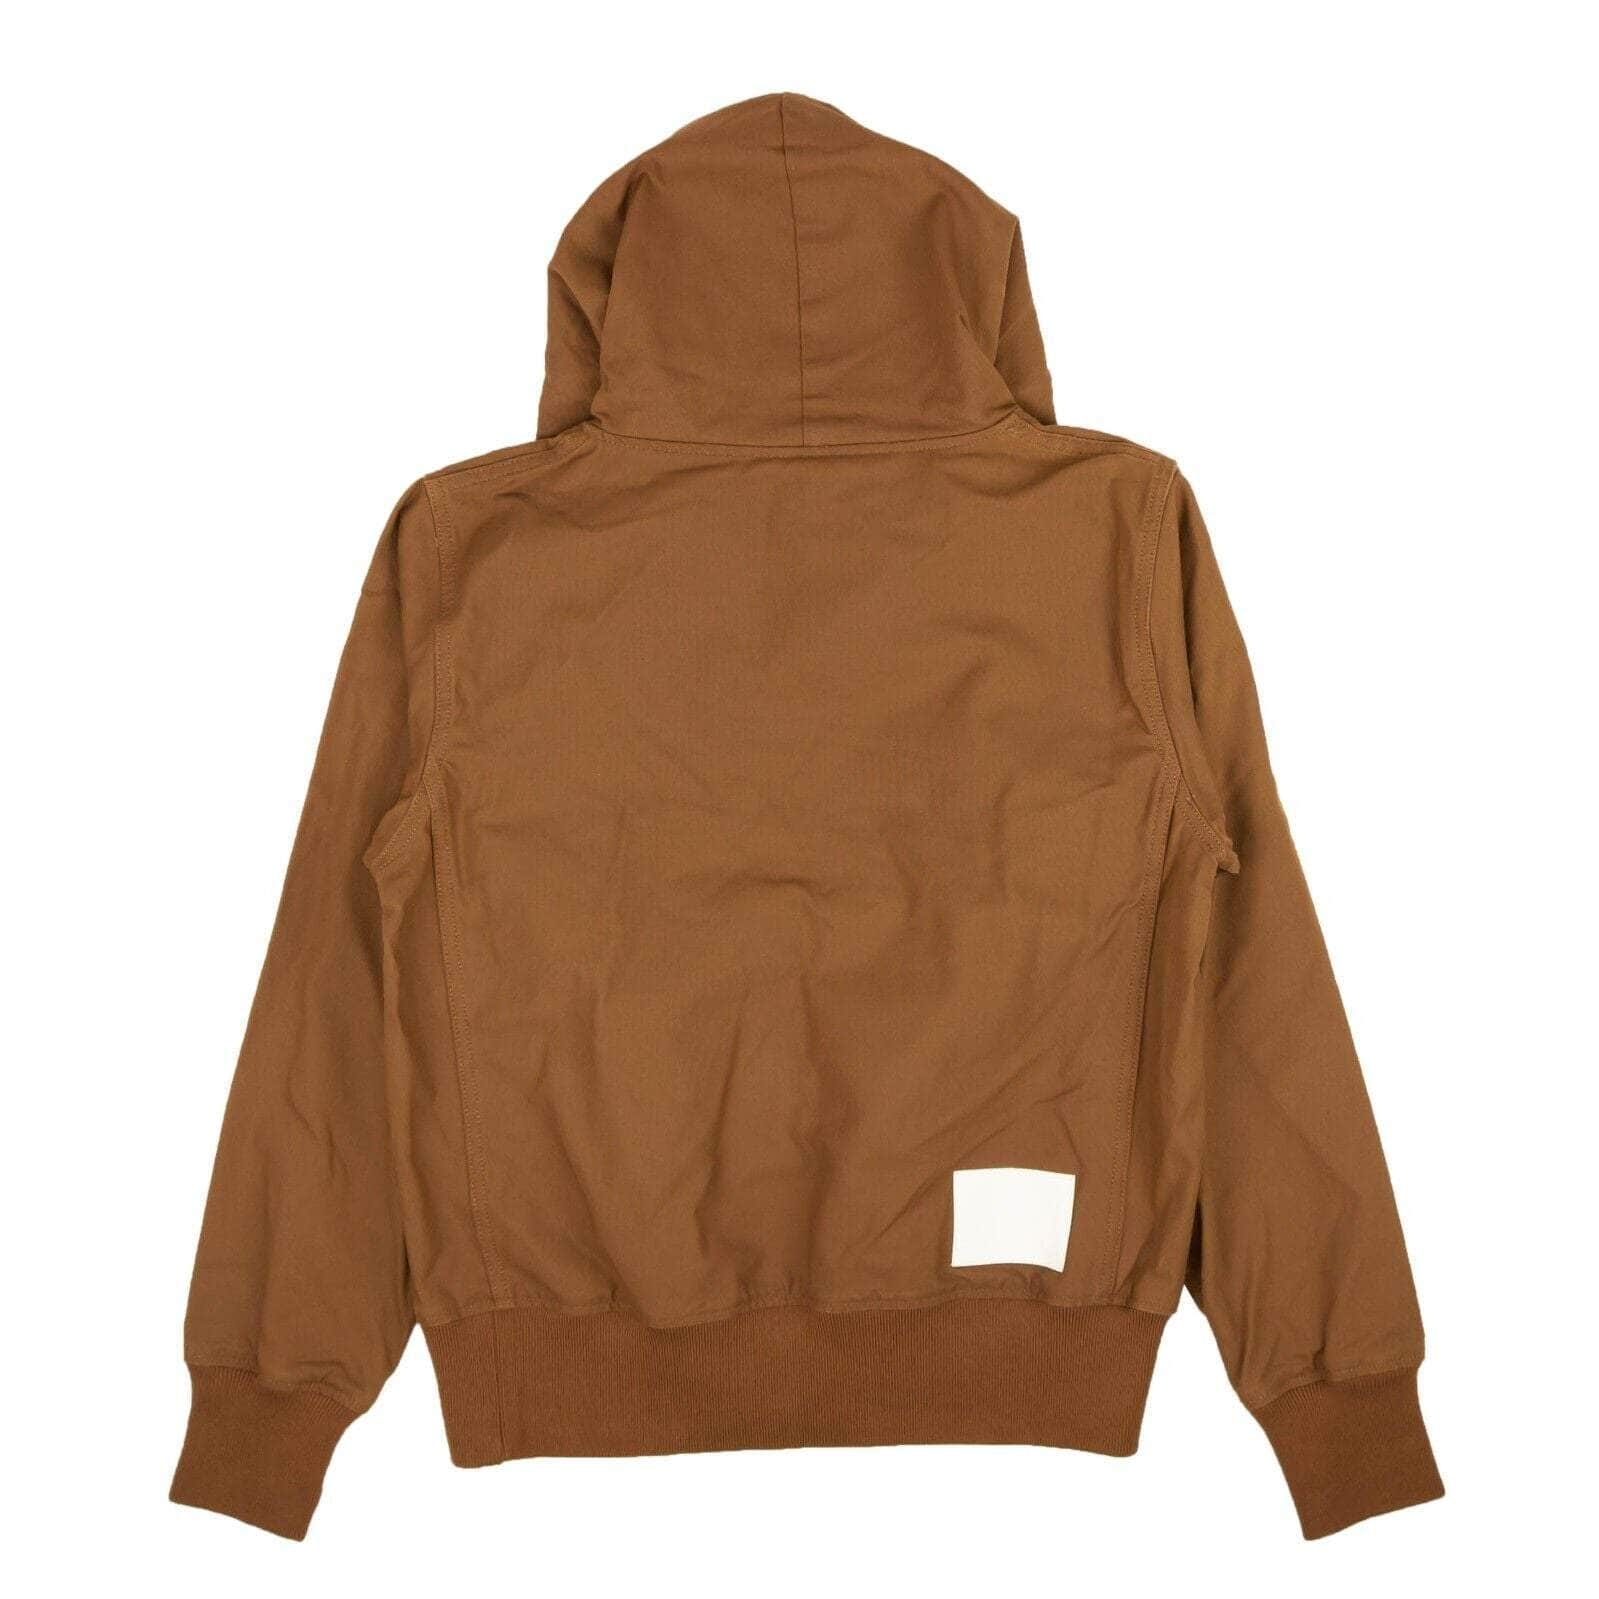 TAKAHIROMIYASHITATheSoloist. 500-750, channelenable-all, chicmi, couponcollection, gender-mens, main-clothing, mens-shoes, MixedApparel, size-s, takahiromiyashitathesoloist S Camel Brown Pullover Hoodie 95-TTS-1003/S 95-TTS-1003/S